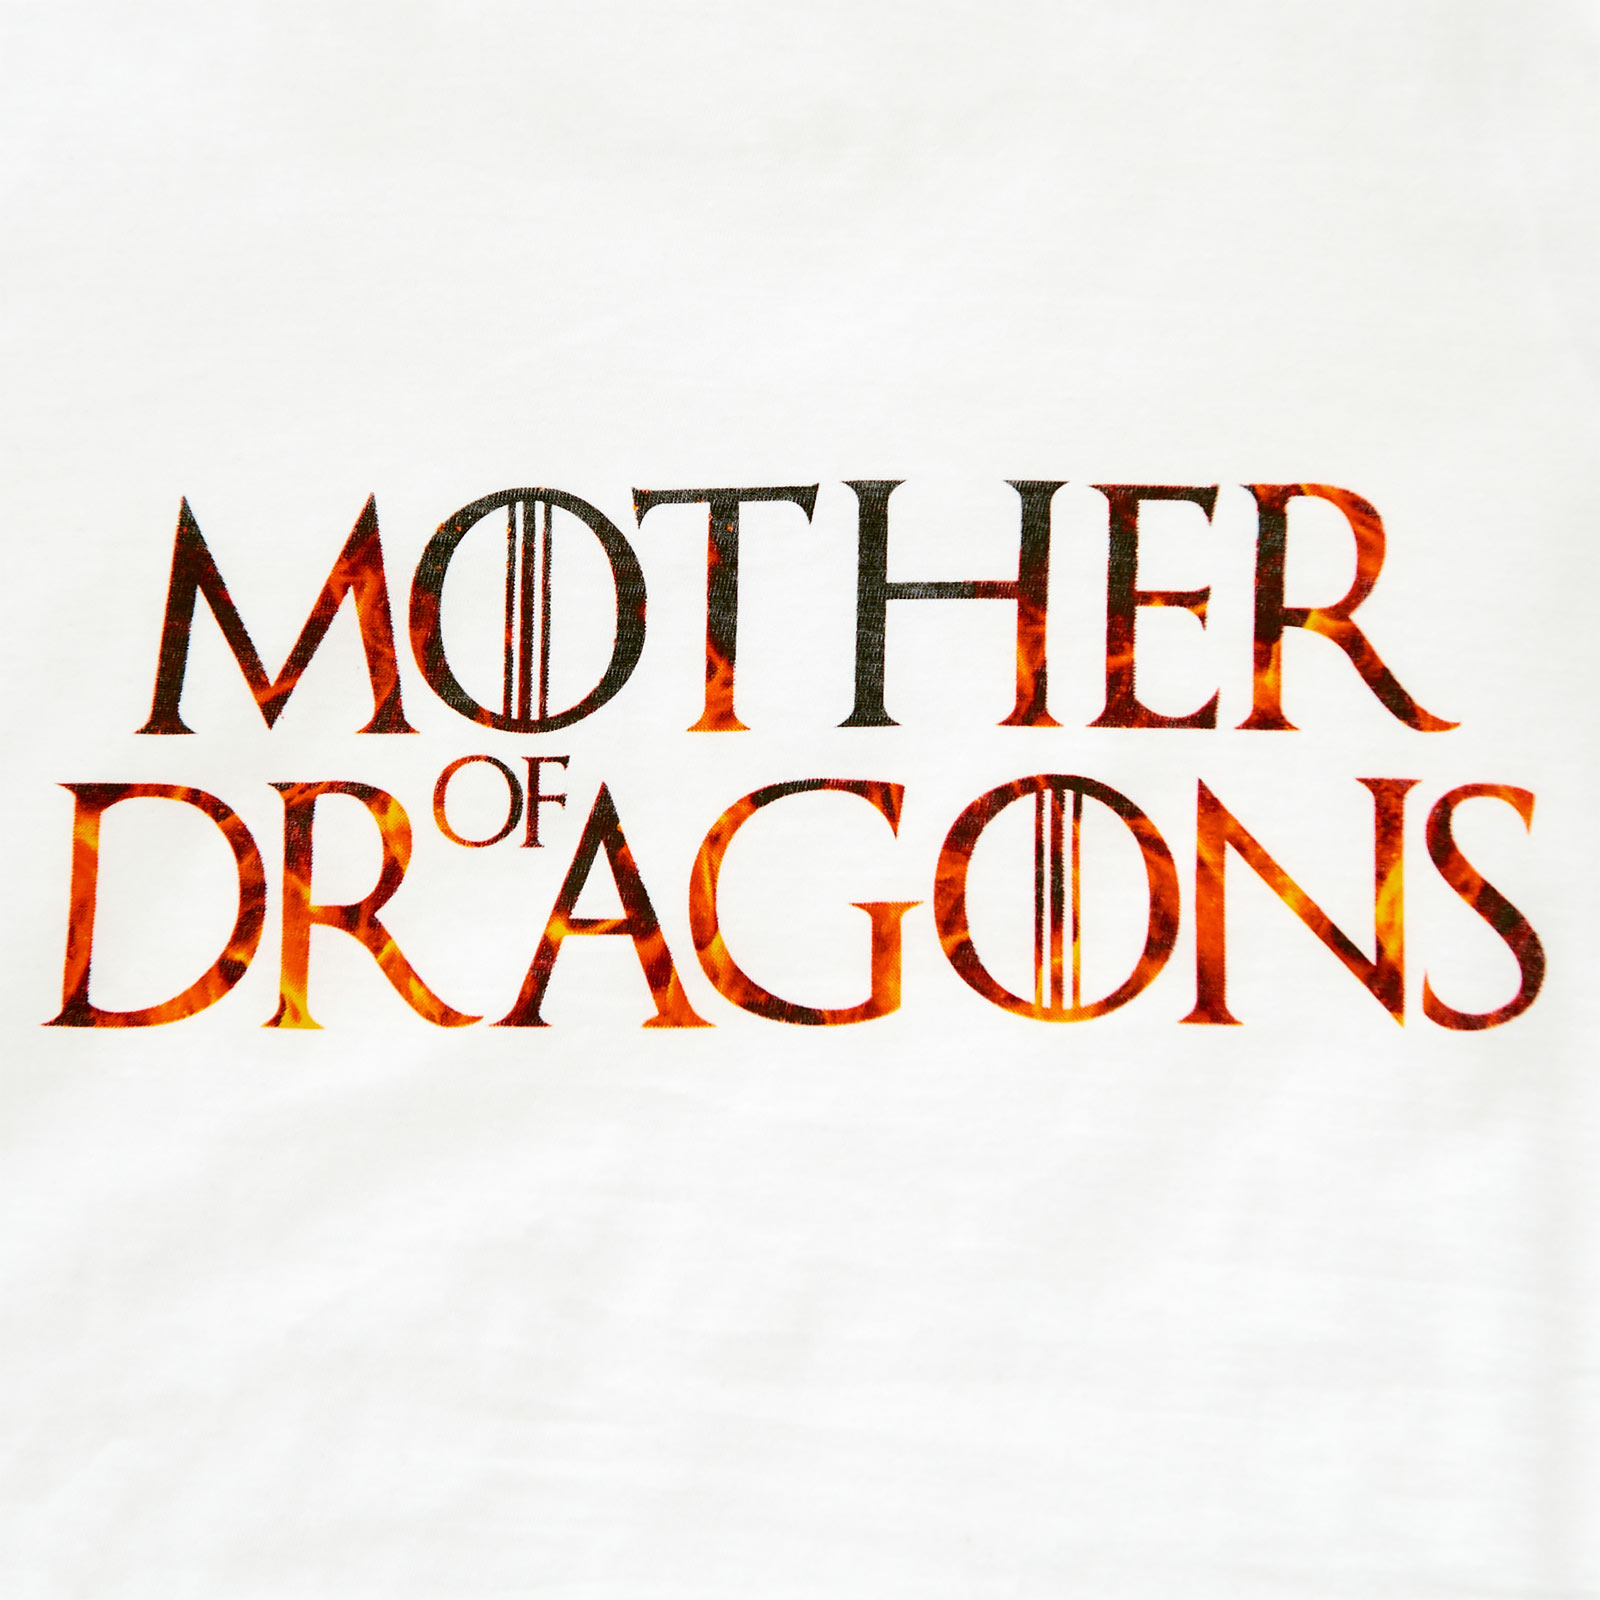 Mother Of Dragons - Women's T-Shirt White